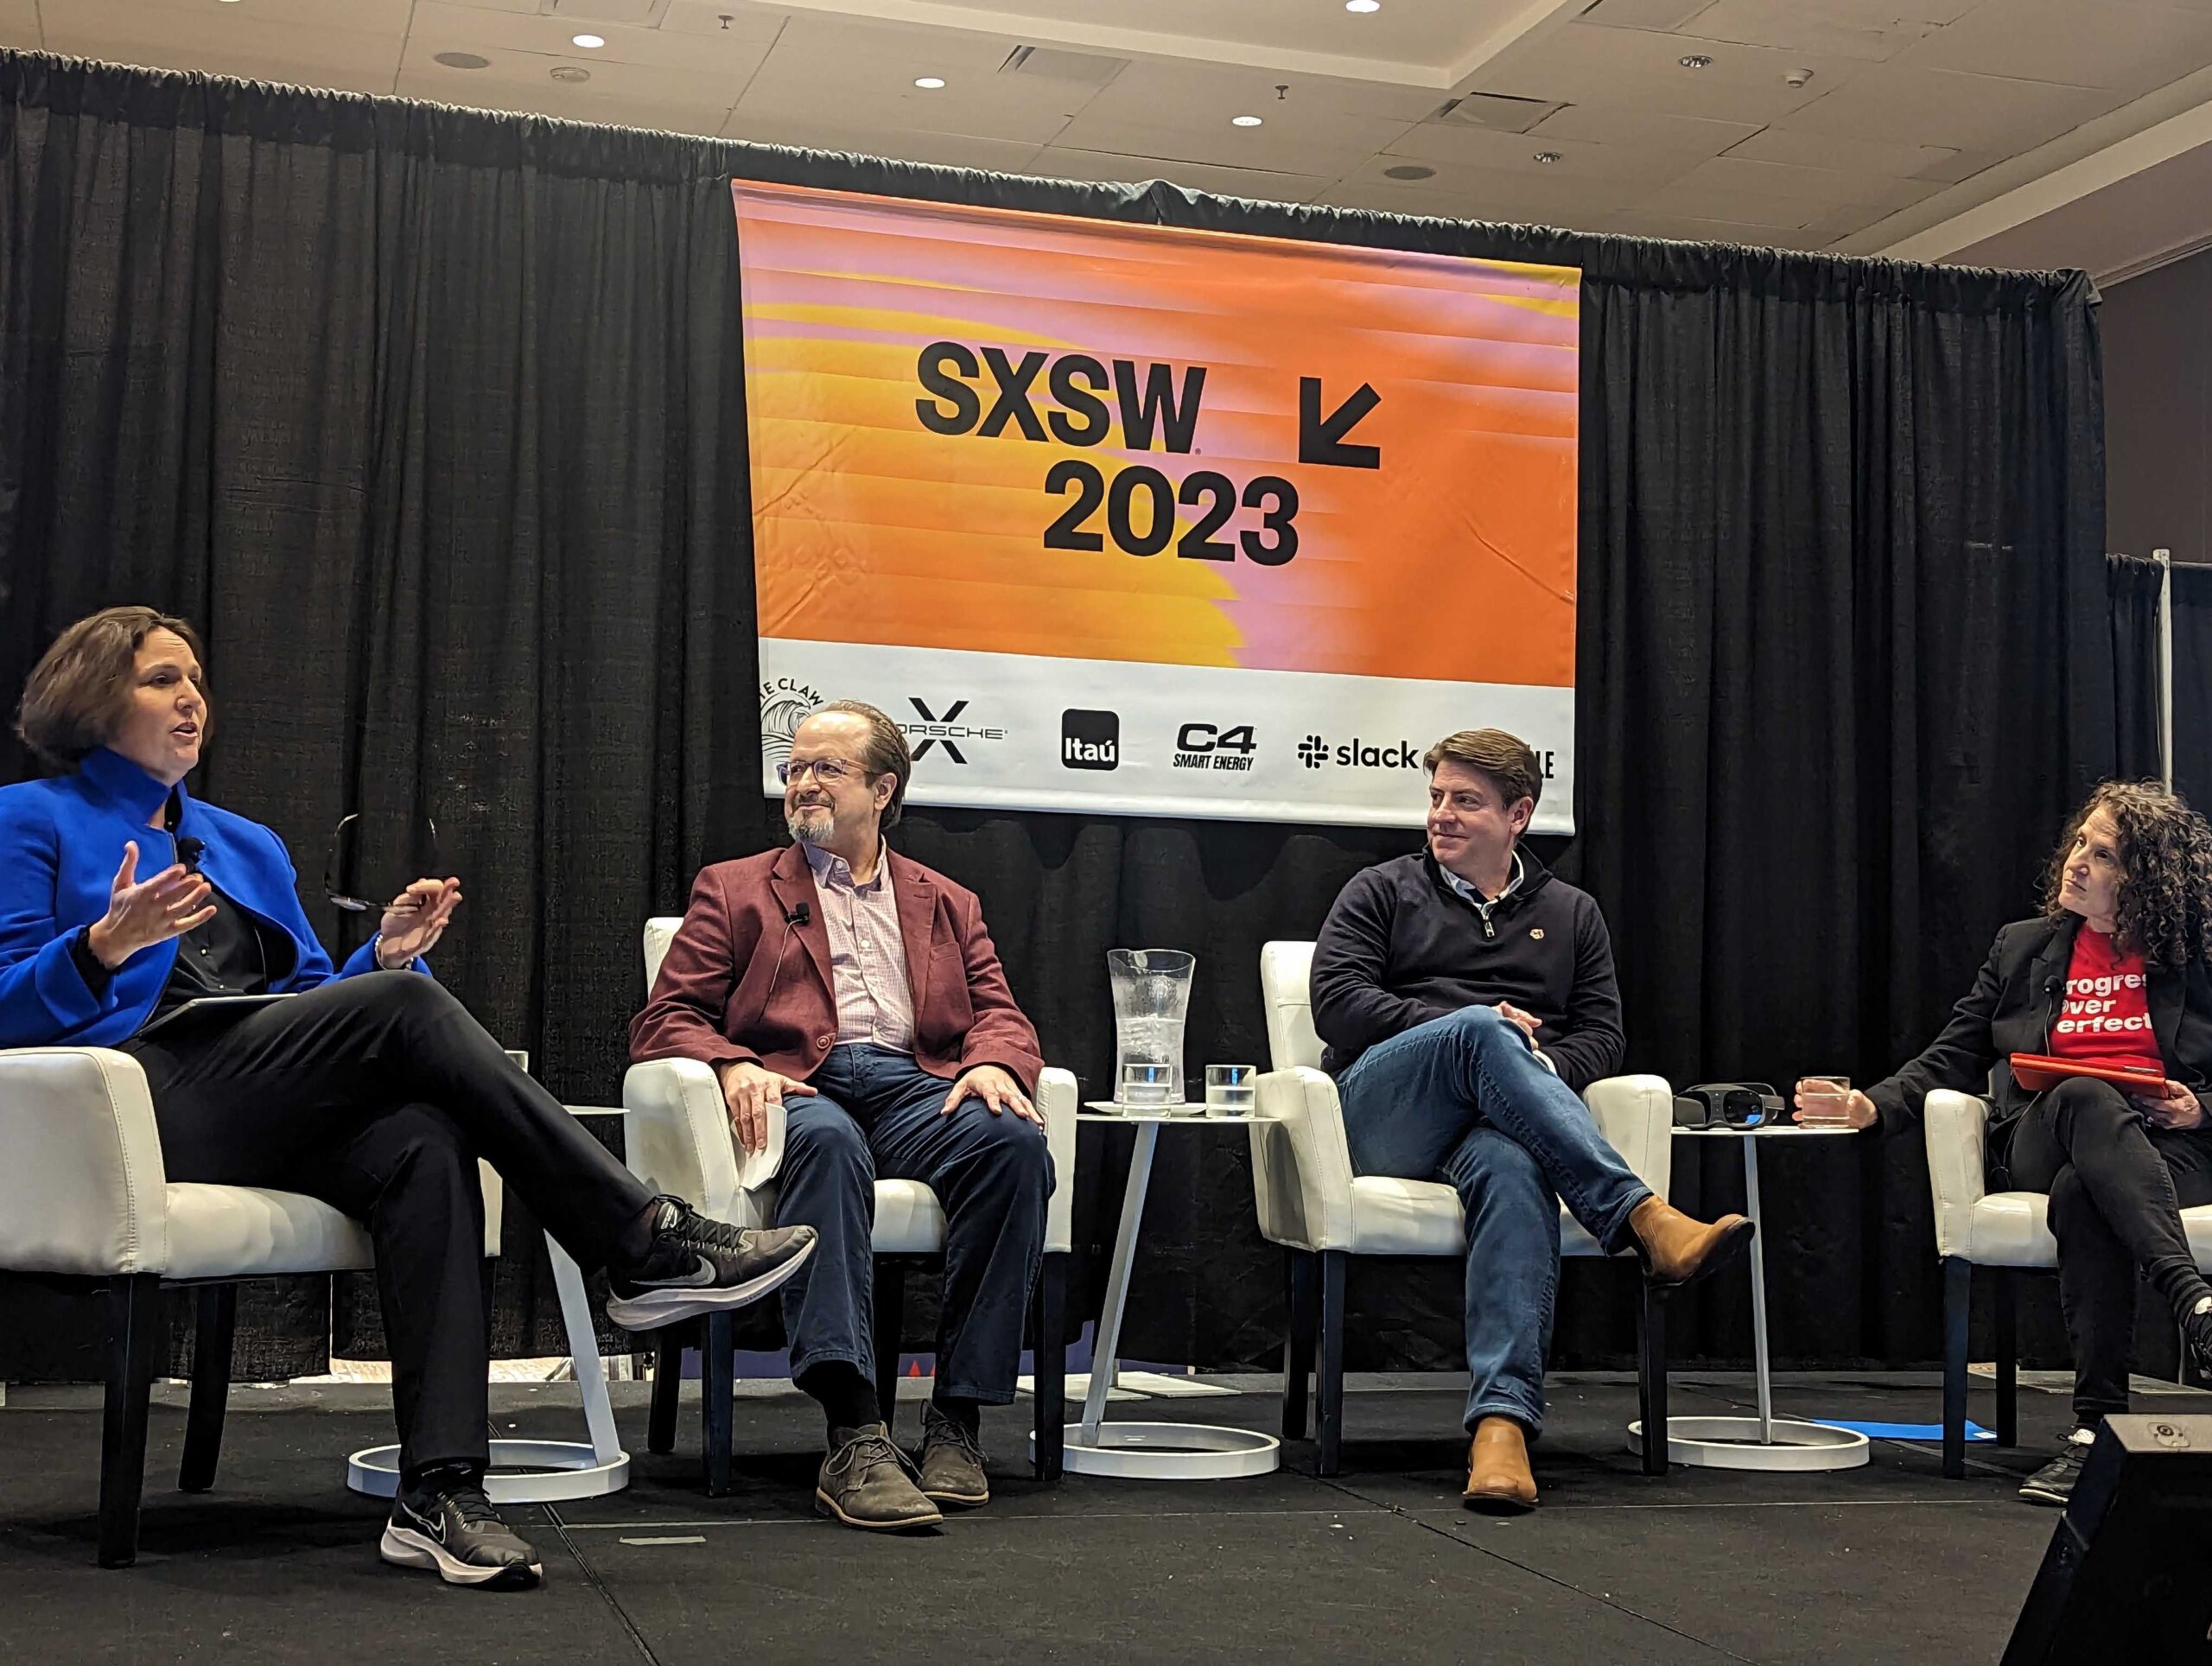 XRA CEO MODERATES WORKFORCE AND ACCESSIBILITY PANEL AT SXSW IN AUSTIN, TEXAS